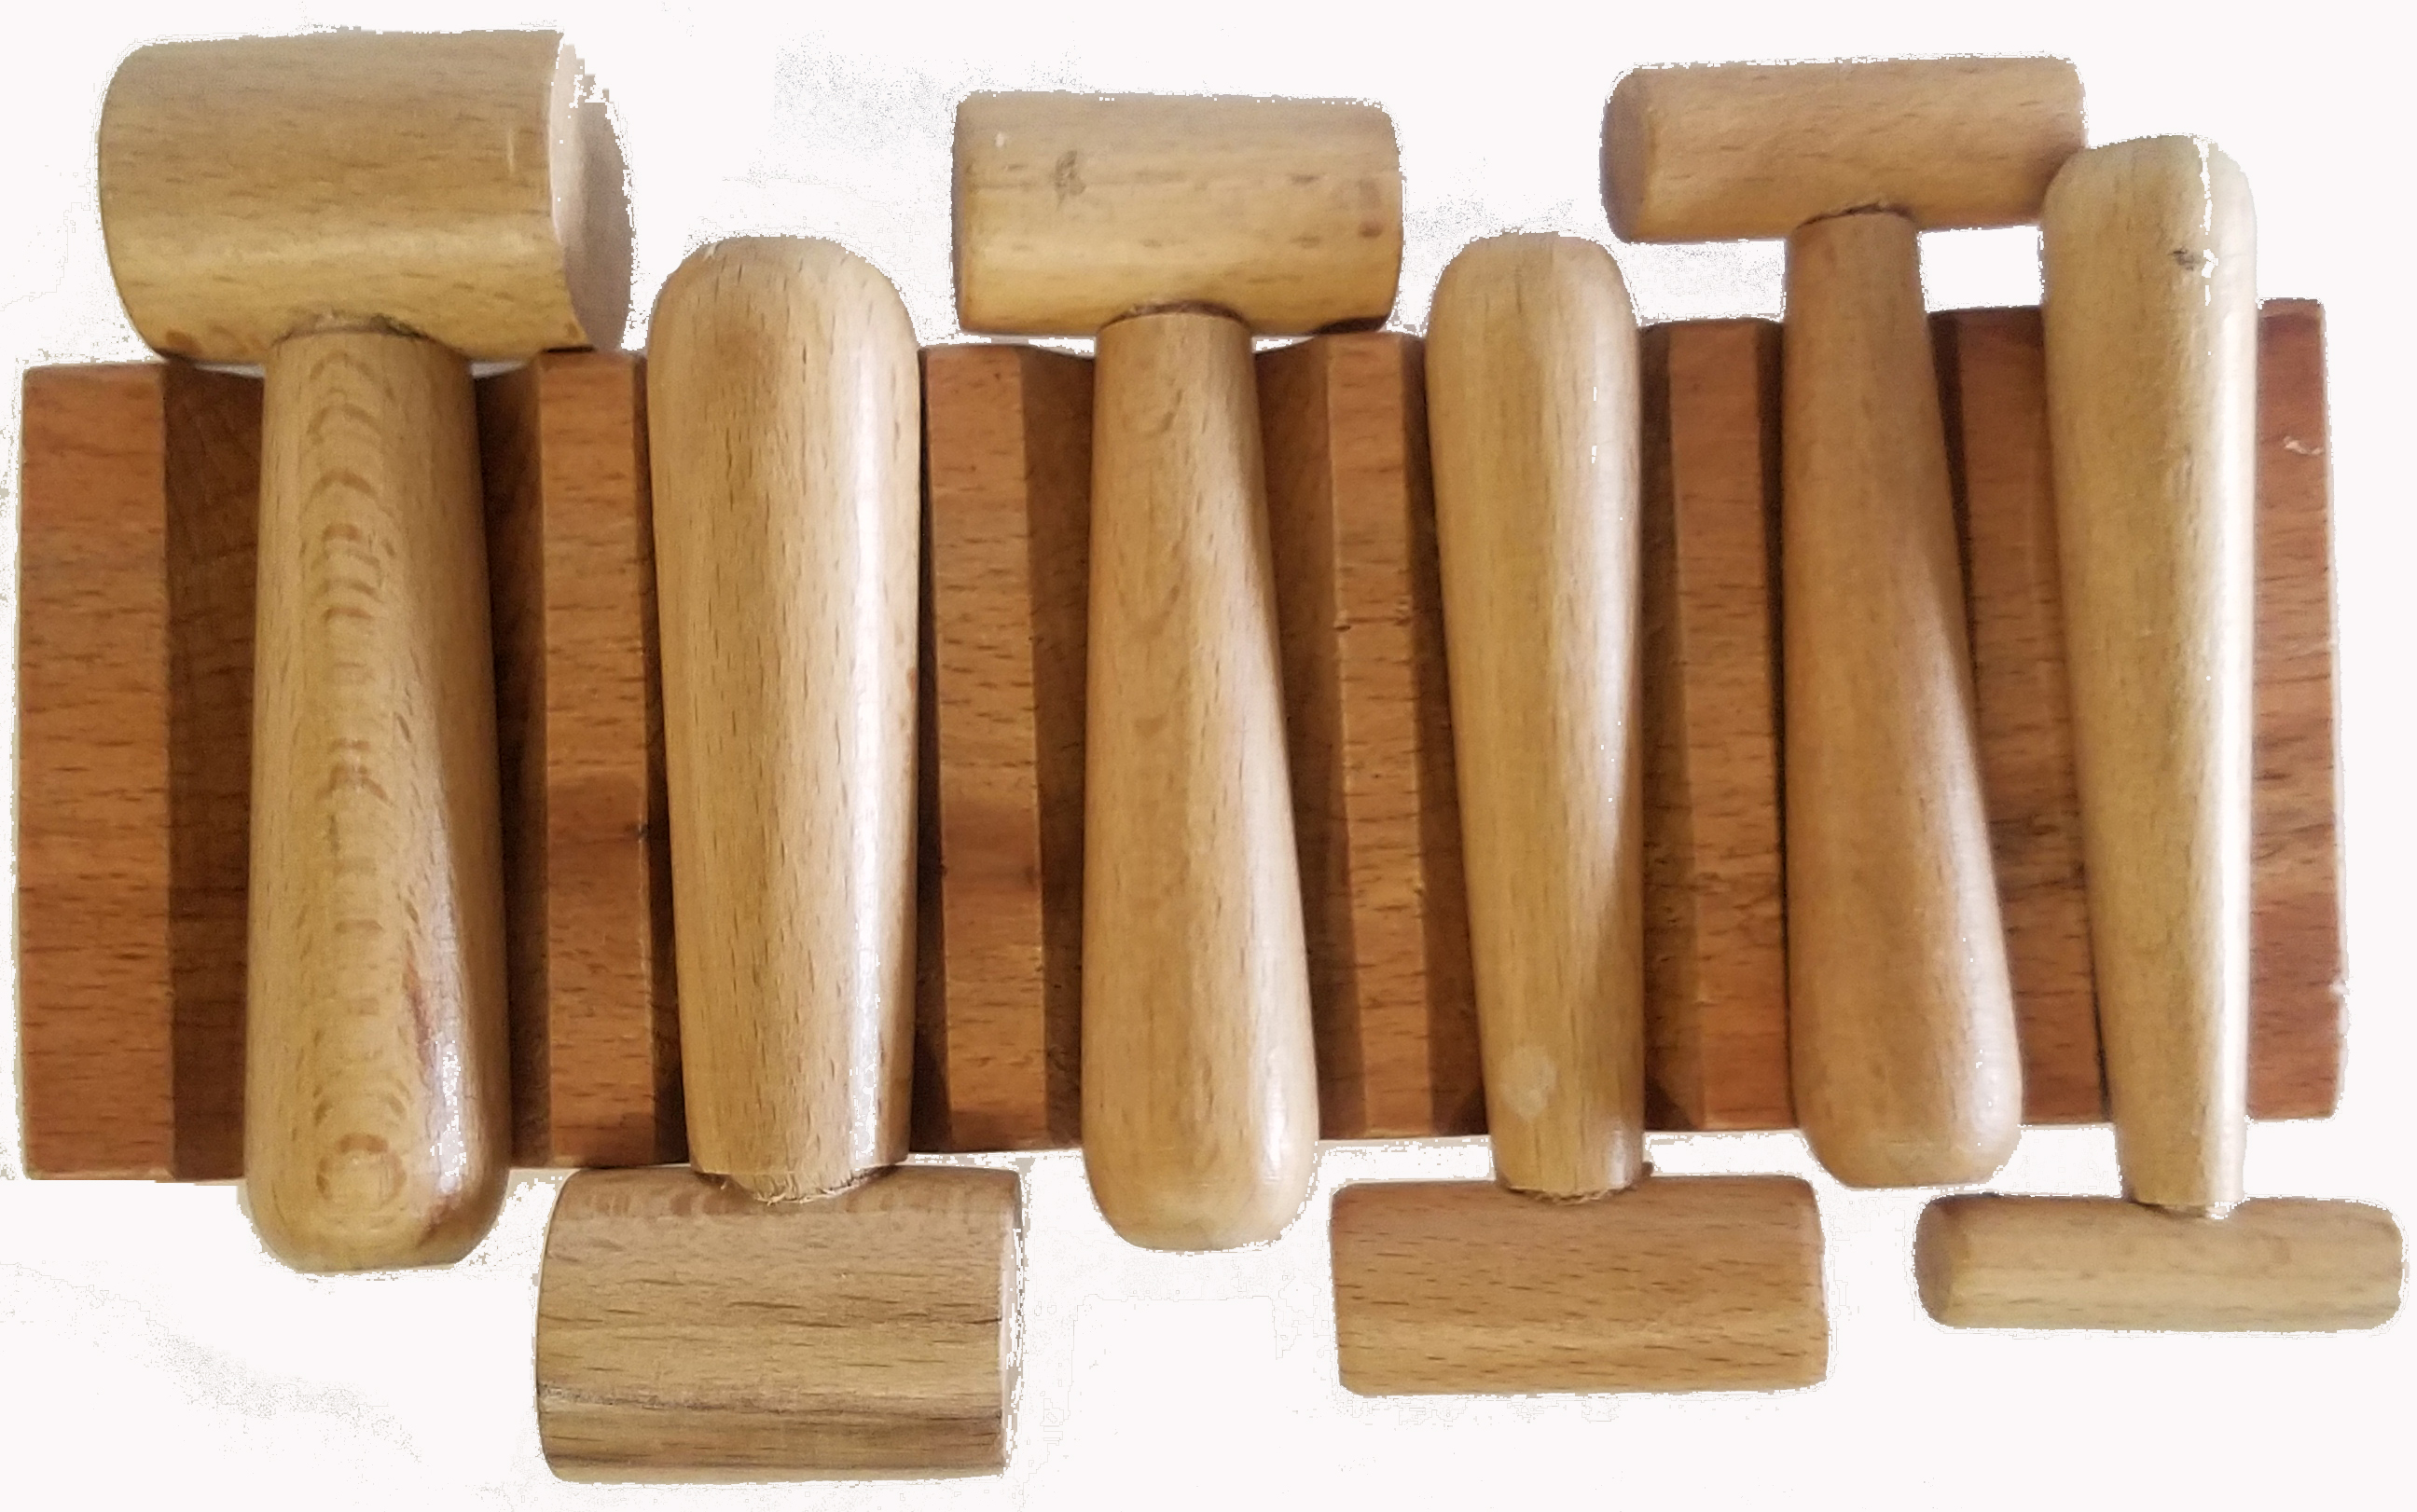 Wooden Swage Block U-Channel Forming Dapping Wooden Block with 6 Hammer Punches